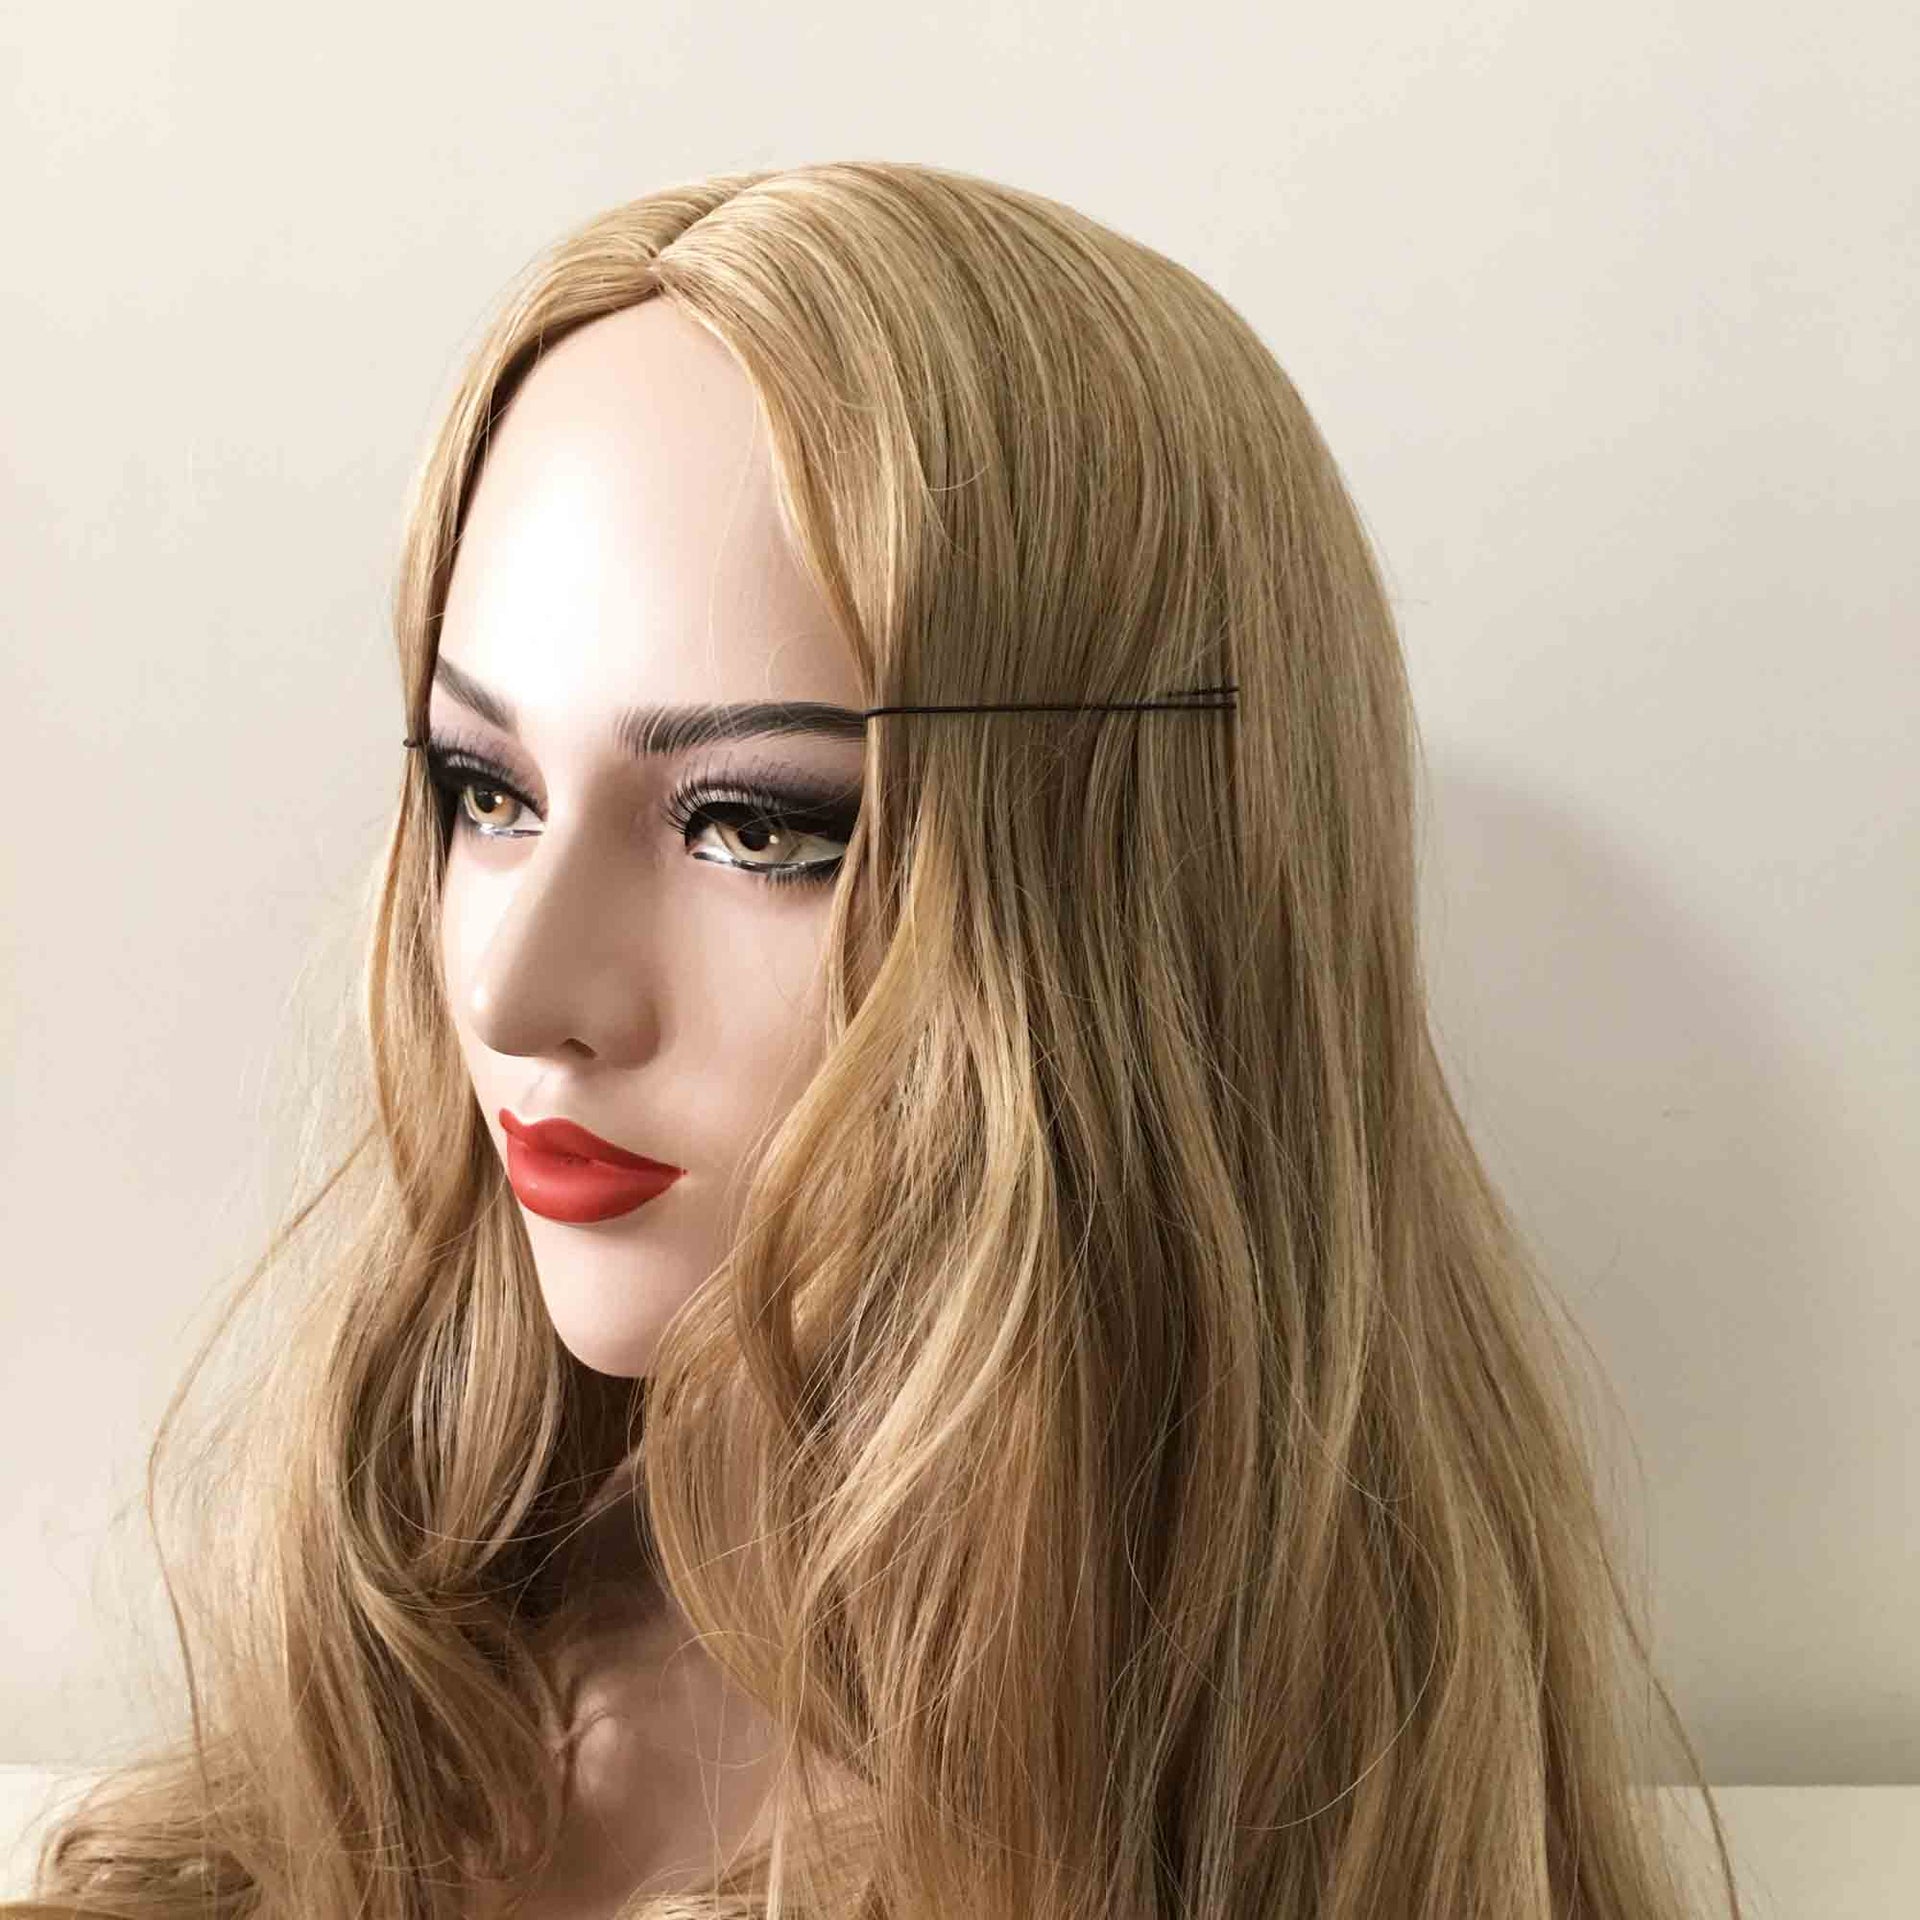 nevermindyrhead Women Brown Long Wavy Middle Part Wig